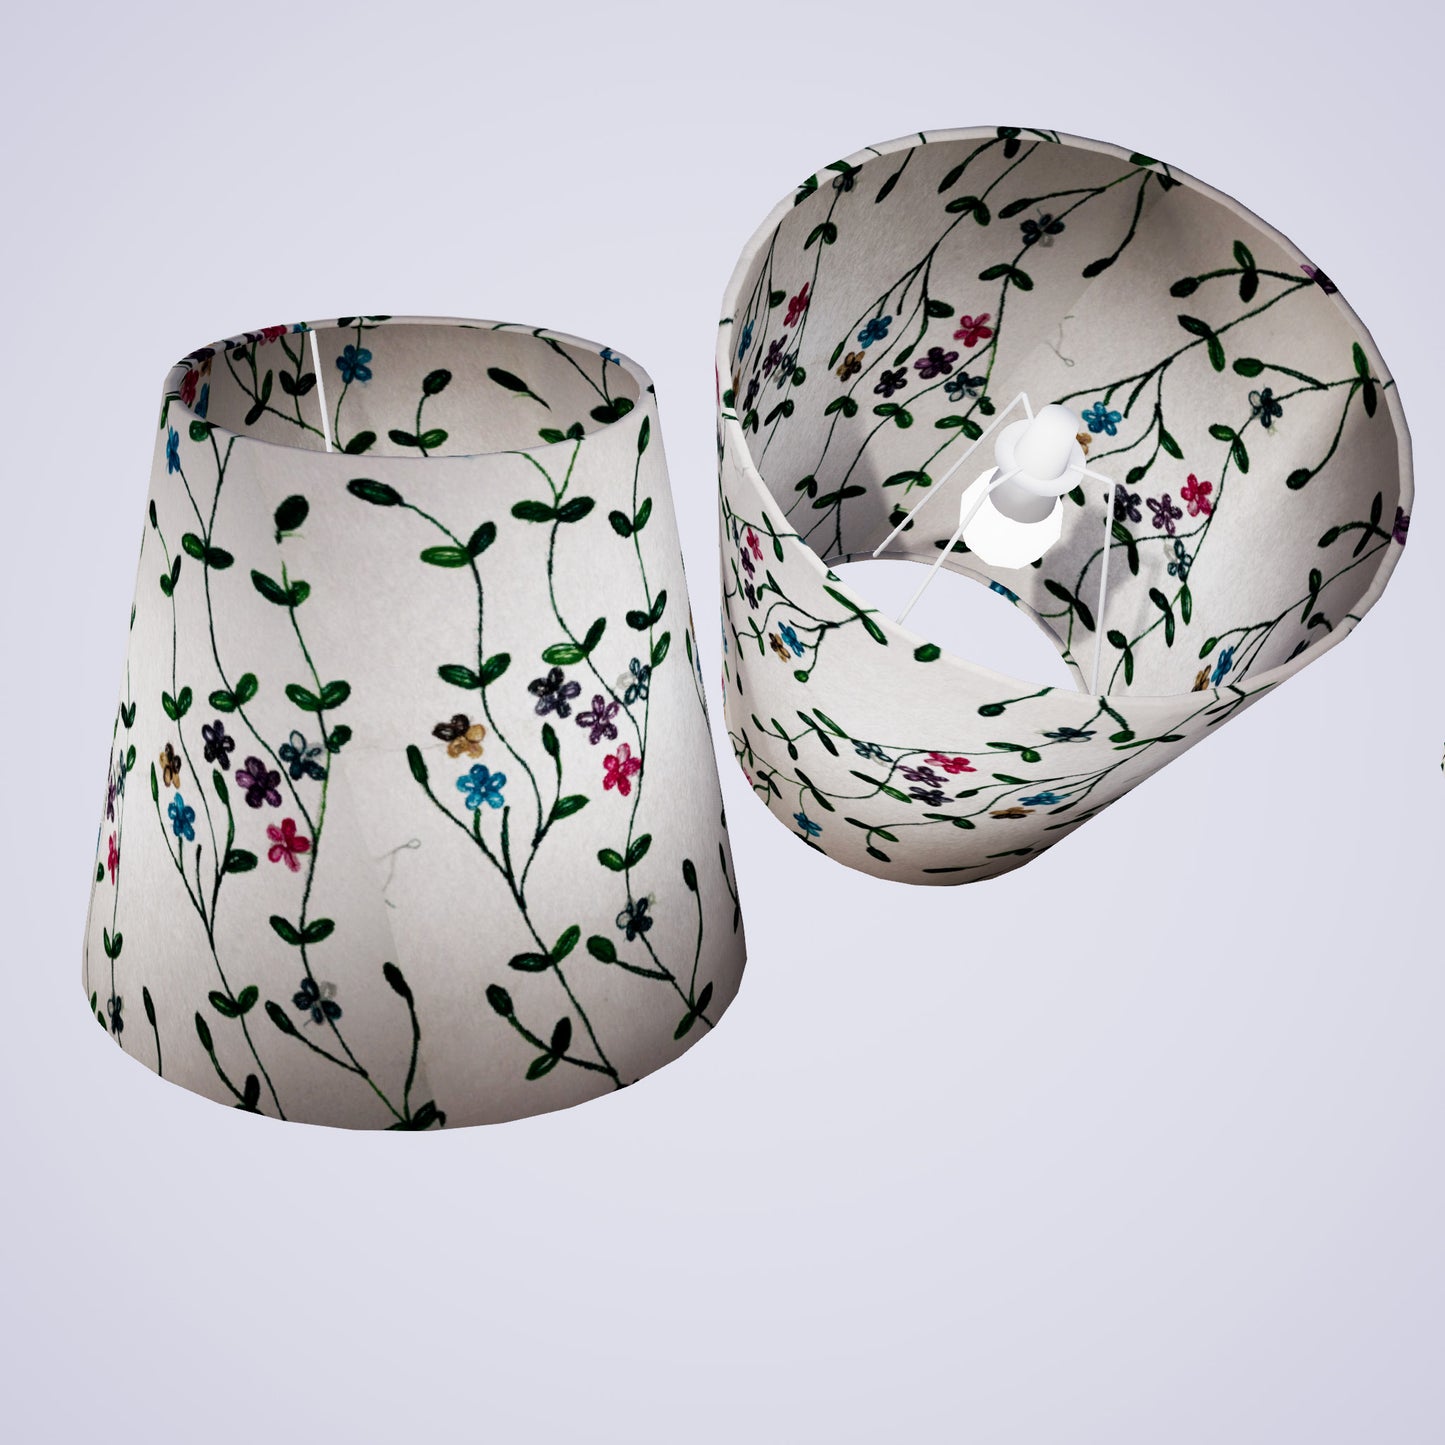 Conical Lamp Shade P43 - Embroidered Flowers on White, 23cm(top) x 35cm(bottom) x 31cm(height)